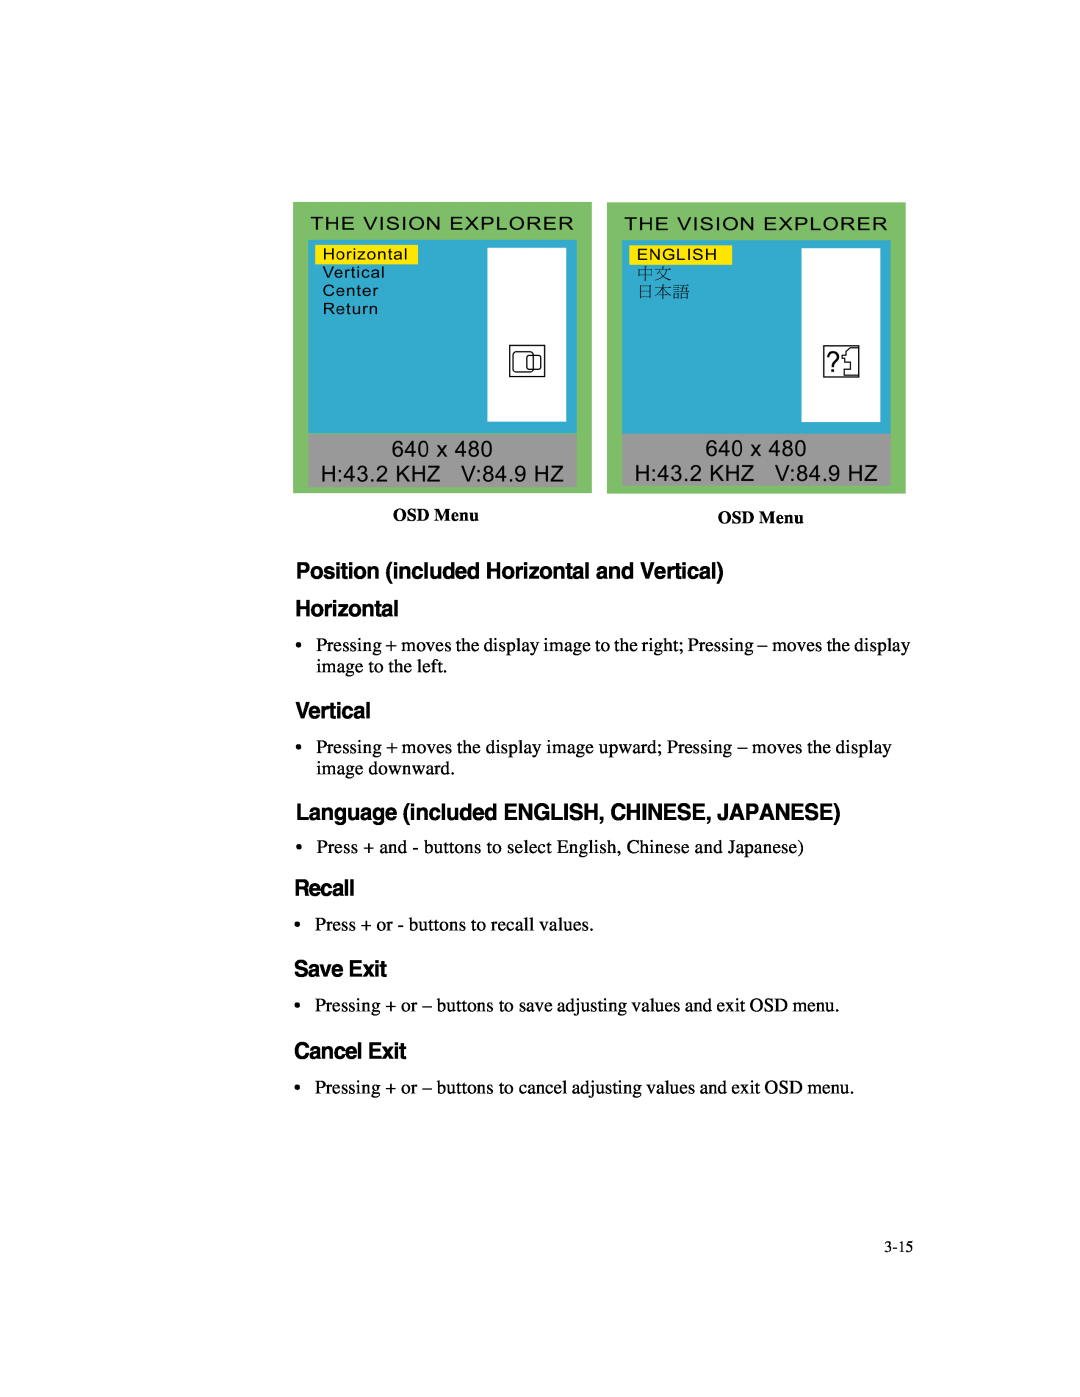 Elo TouchSystems 1247L Position included Horizontal and Vertical Horizontal, Language included ENGLISH, CHINESE, JAPANESE 